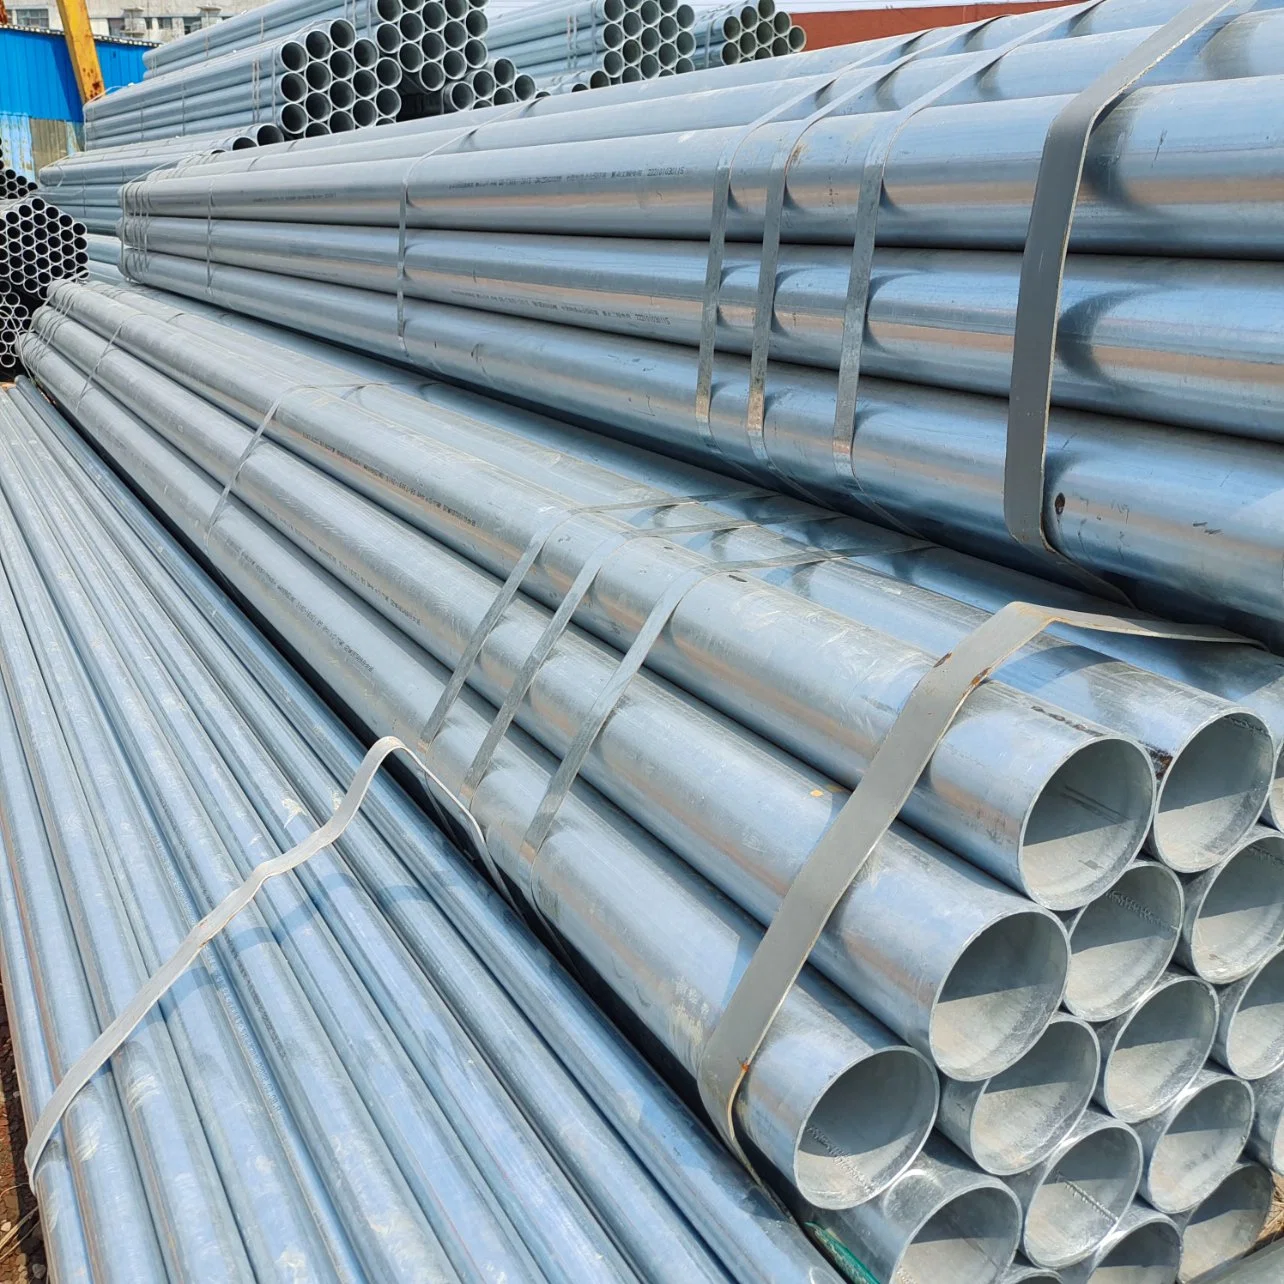 Galvanized Steel Round Pipe Hot Dipped Black Painted Pre Galvanized Square Rectangular Profiles Hollow Section Shs Chs Rhs Steel Tube for Building Materials